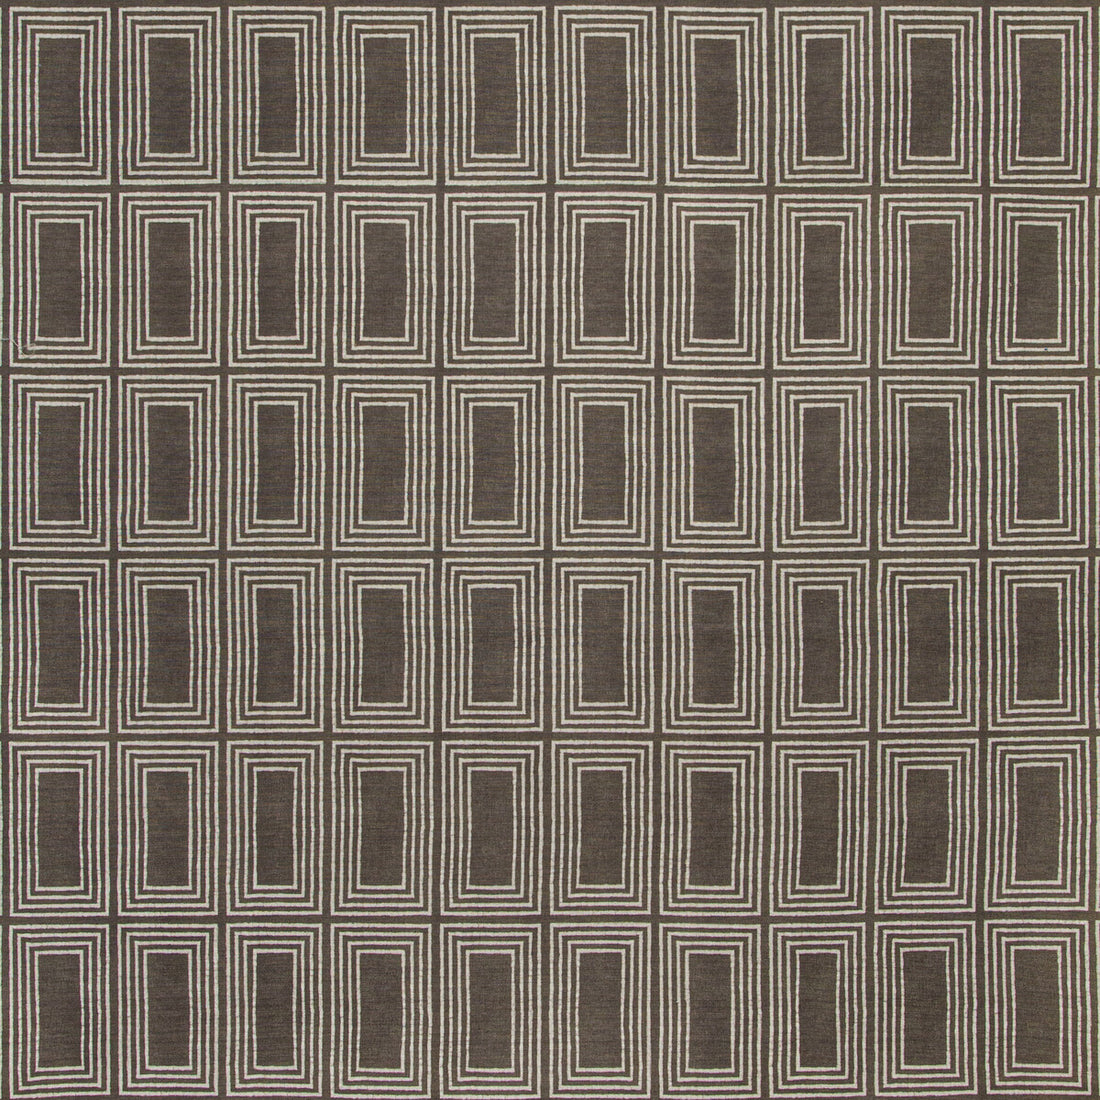 Cadre fabric in clay color - pattern 2019126.616.0 - by Lee Jofa